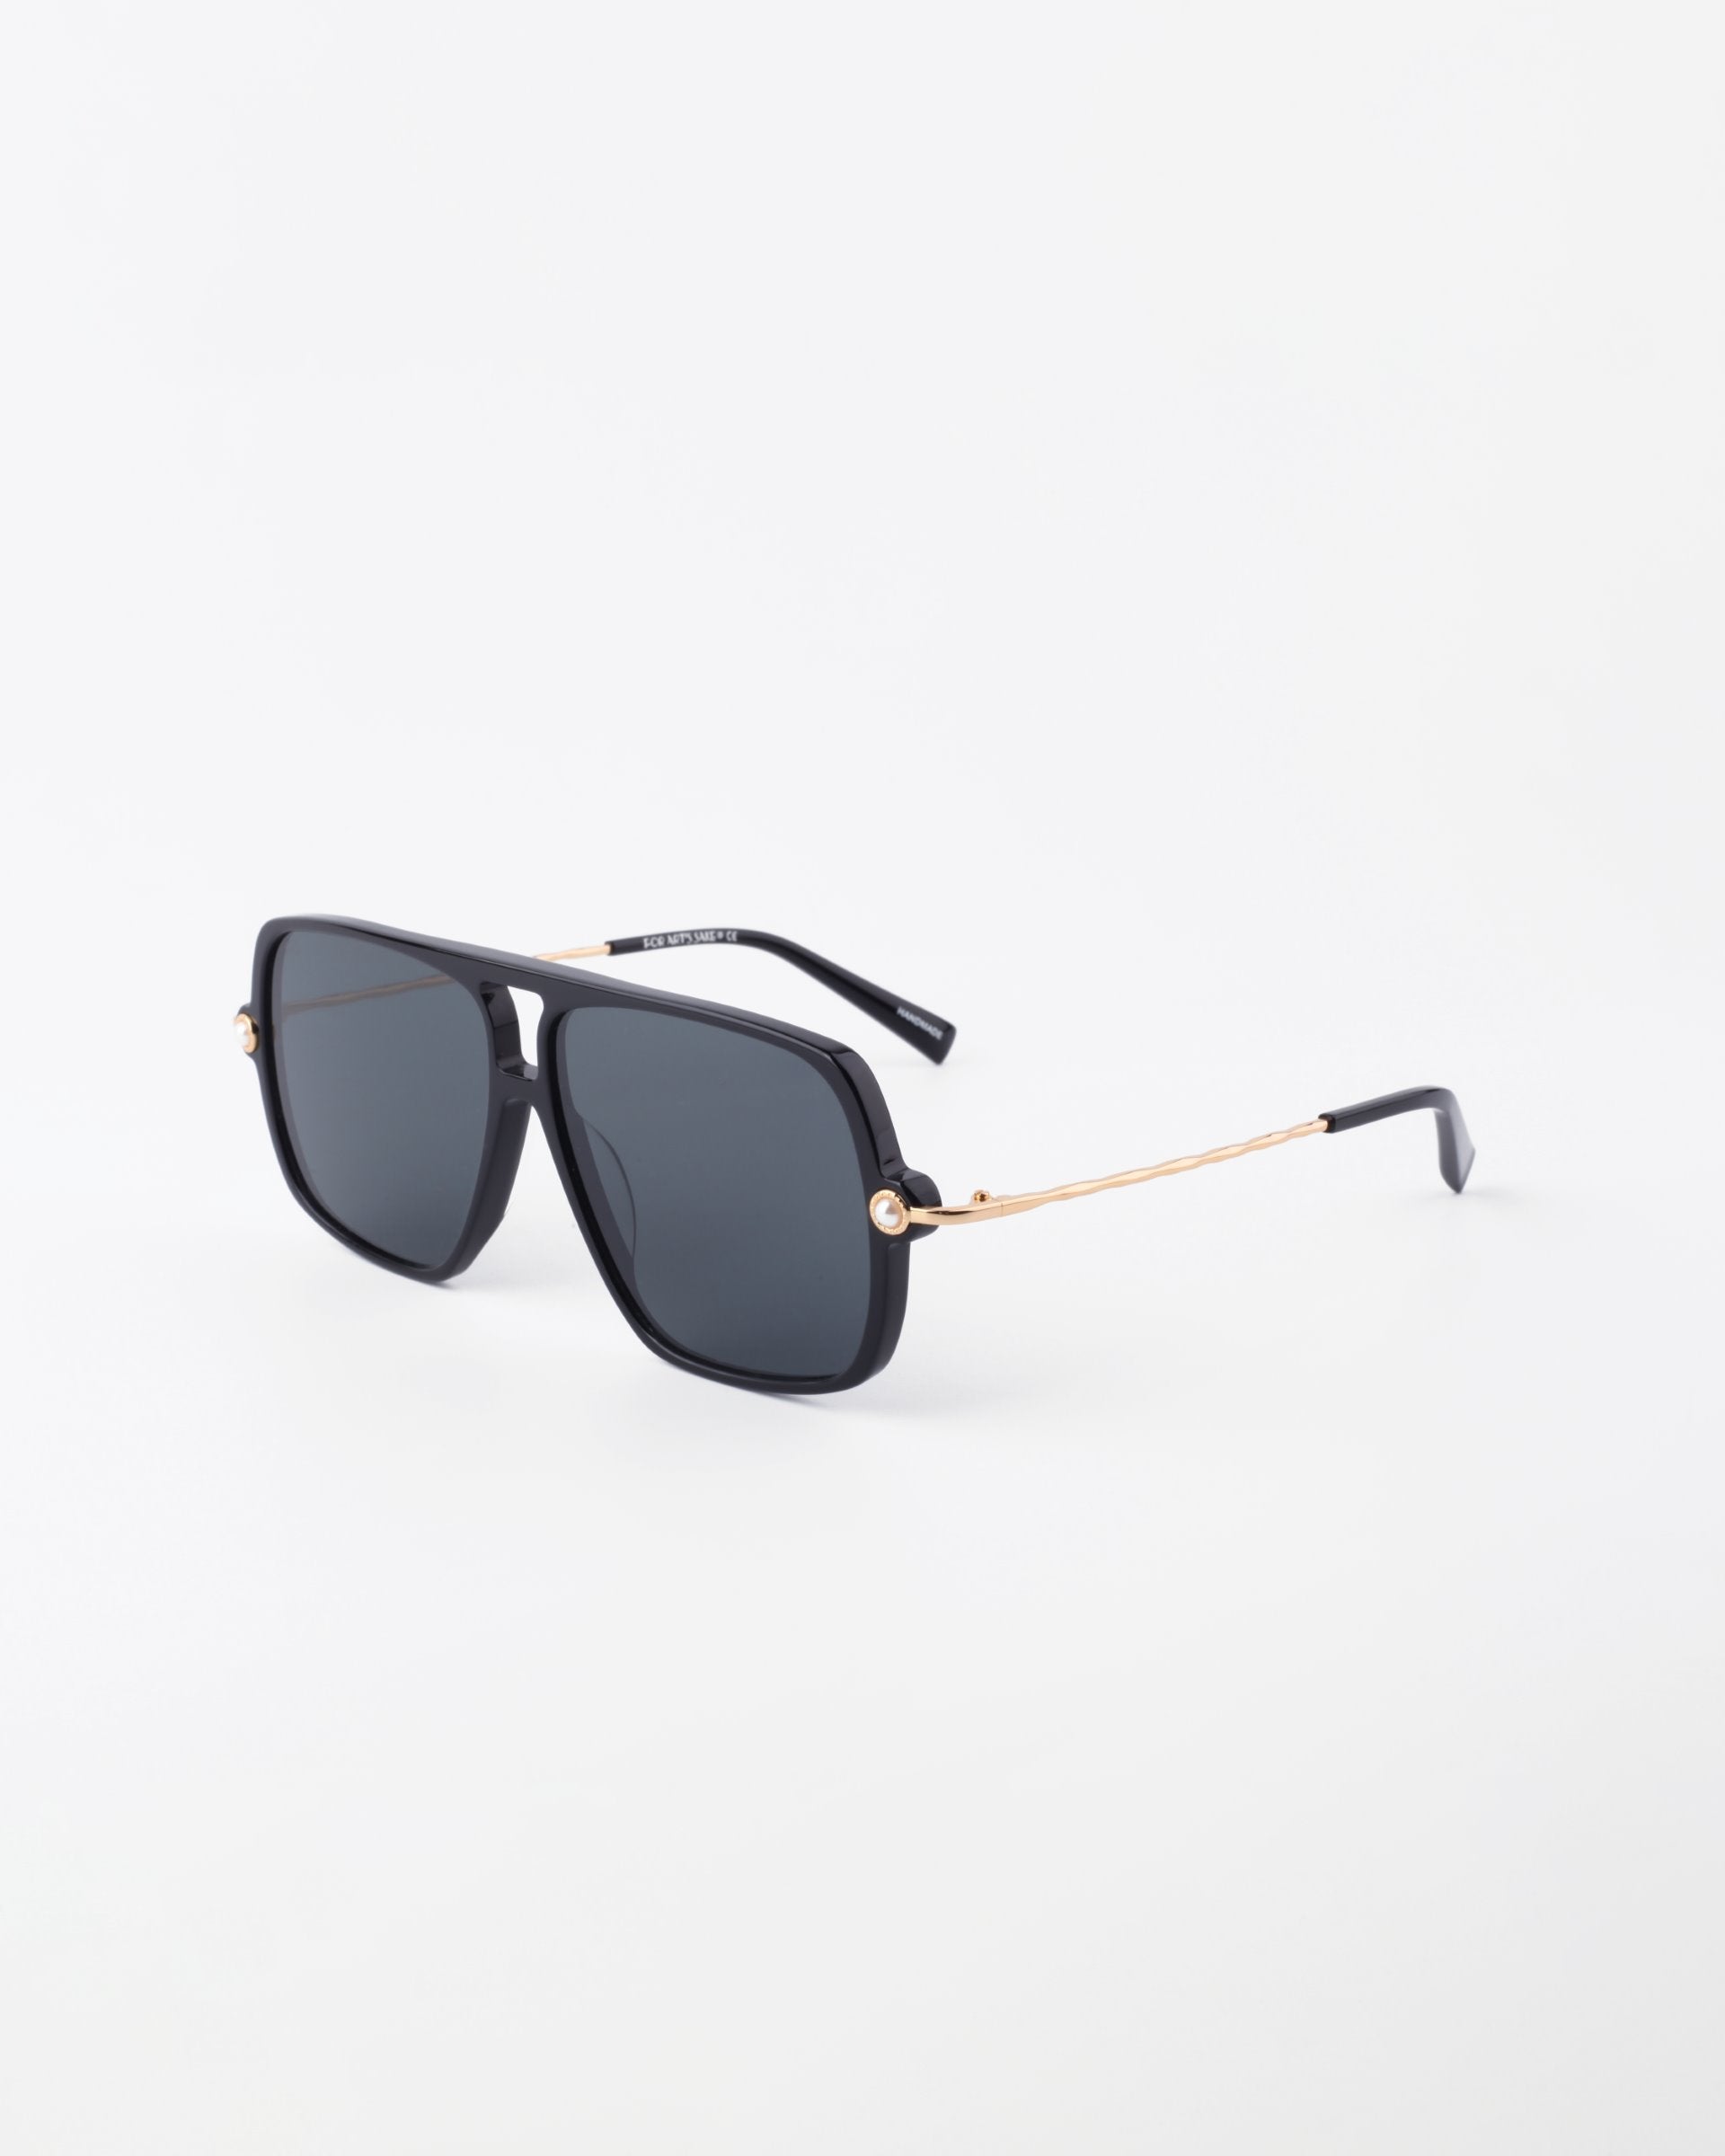 A pair of stylish Cinnamon aviator sunglasses by For Art's Sake® with black rectangular frames and dark tinted lenses. The temples are 18-karat gold-plated with a sleek design and black tips, featuring subtle faux pearl embellishment. The sunglasses are set against a white background.